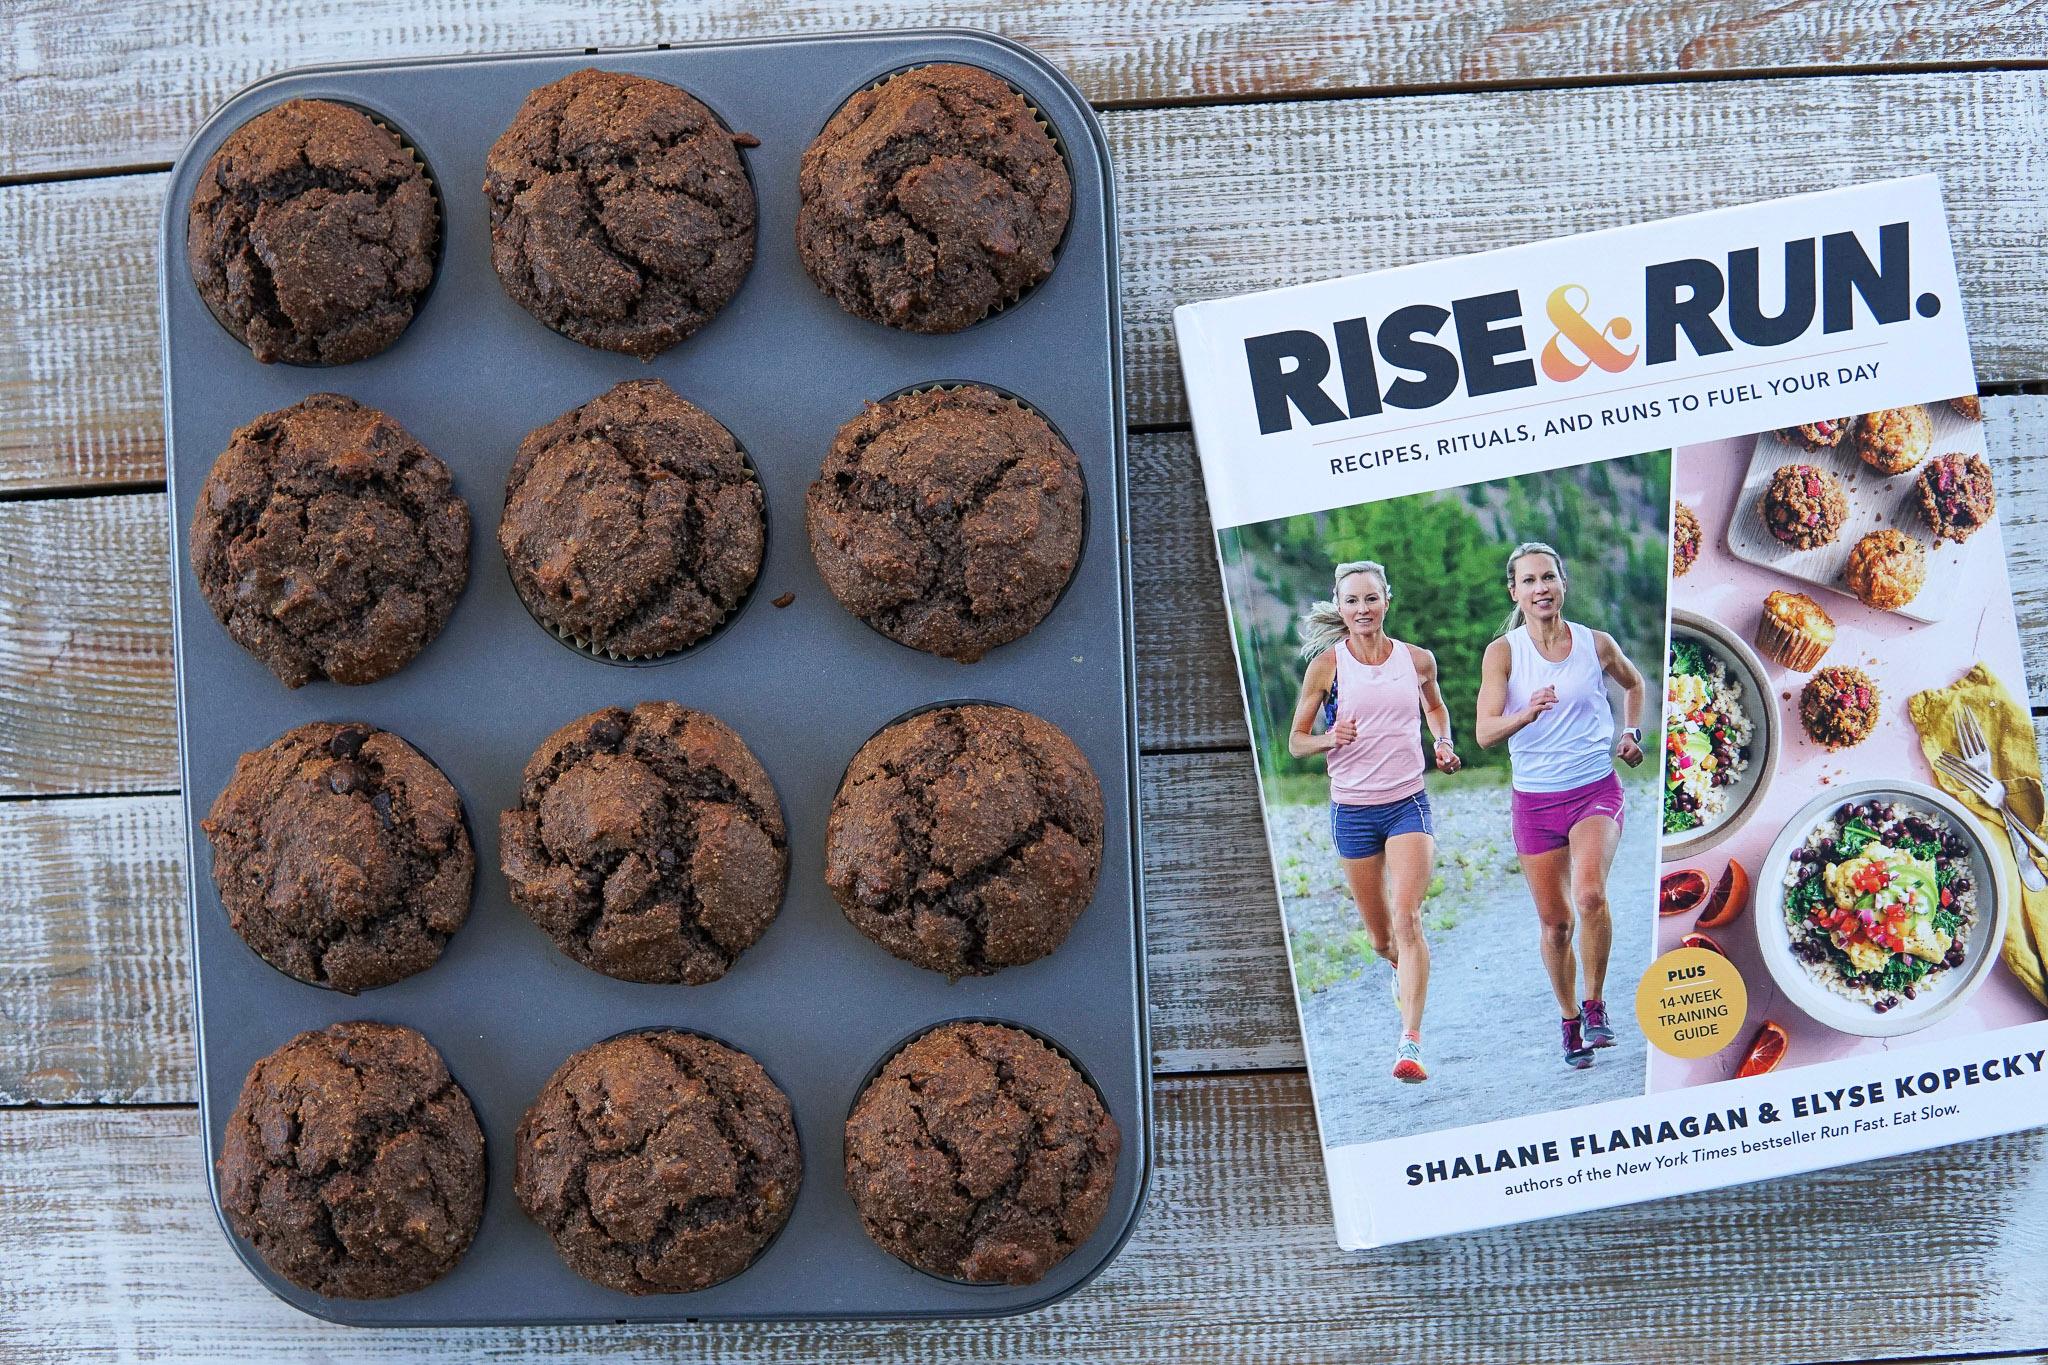 Super-hero Muffins and Rise and Run book by Elyse Kopecky